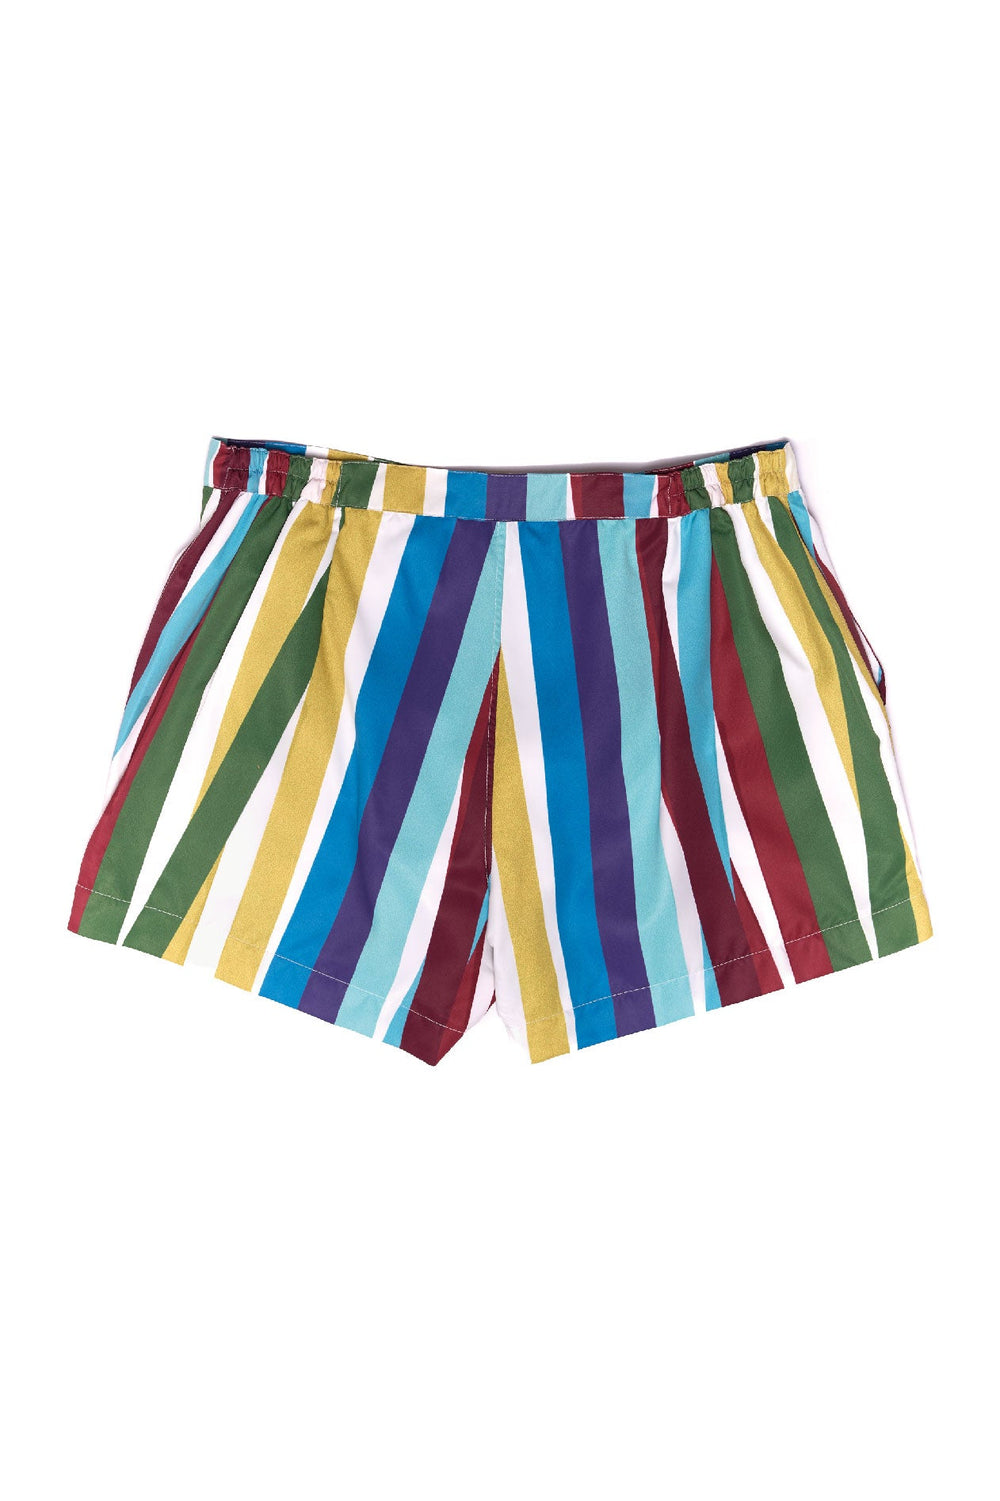 Colorful striped shorts with elastic waistband